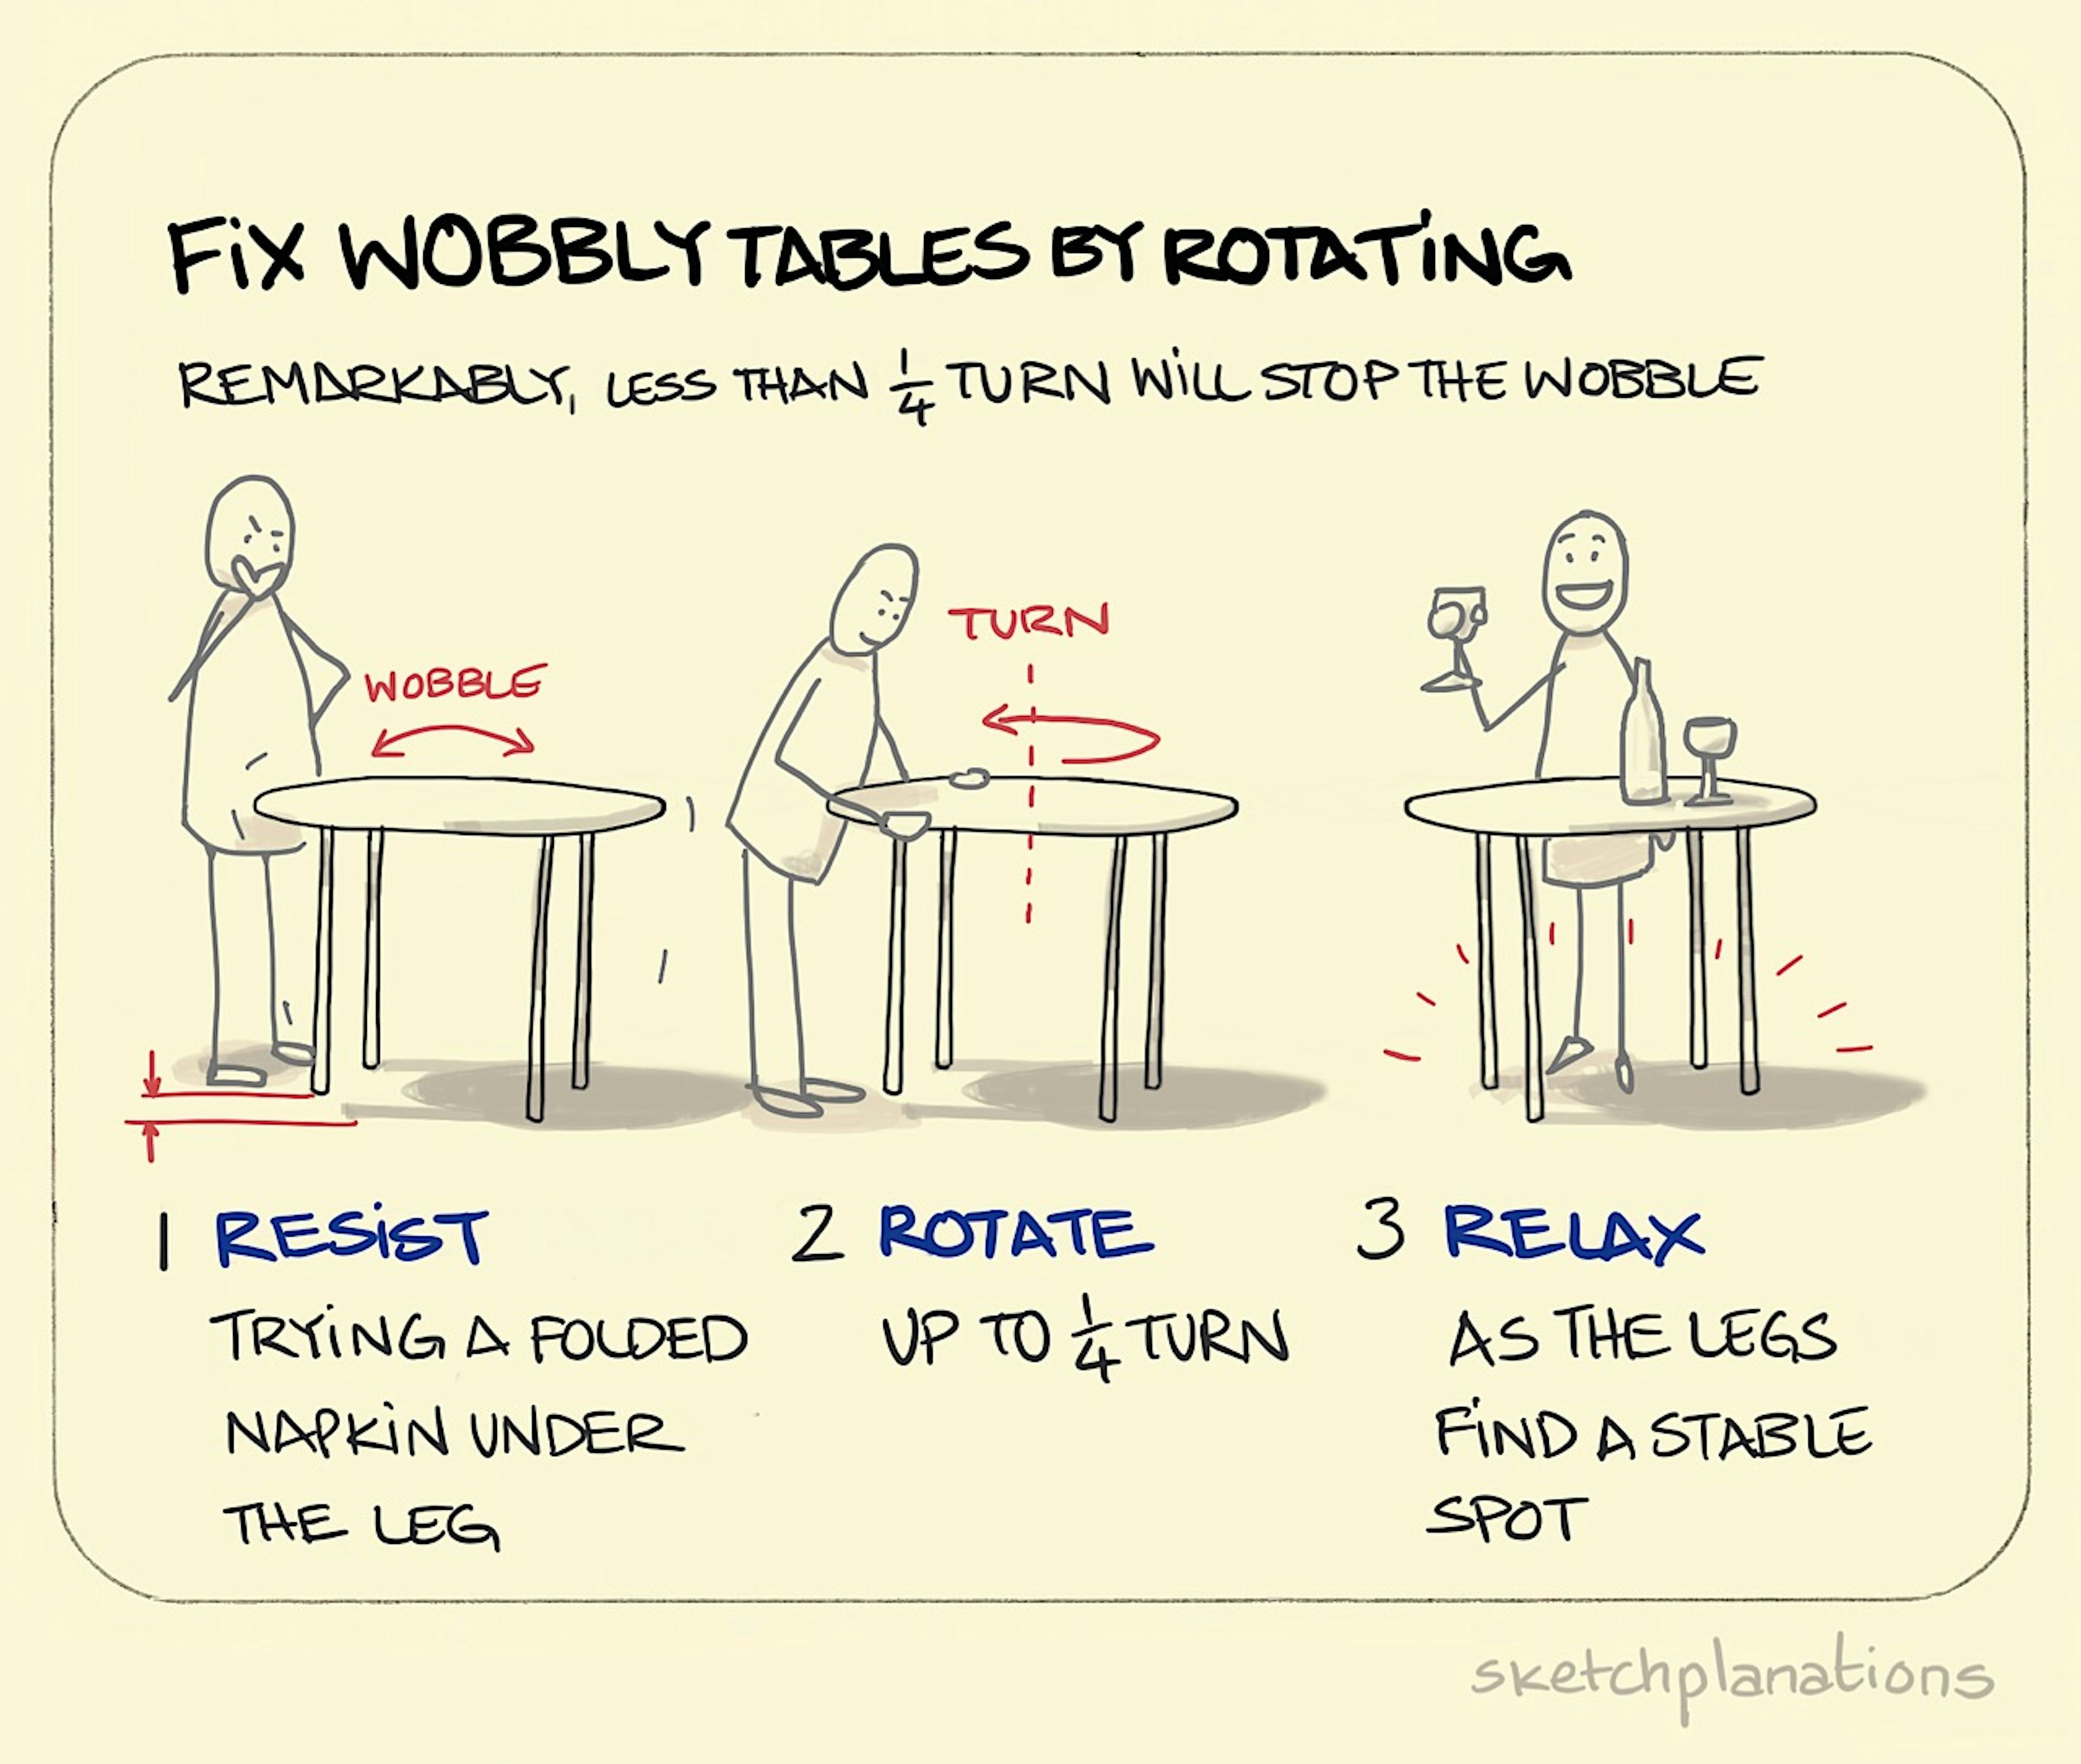 Fix wobbly tables by rotating illustration: a puzzled character considers how to prevent their 4-legged table from wobbling. Instead of popping something under one of the legs, they're encouraged to try rotating it. It's worked, and they celebrate with a glass of something cold! 